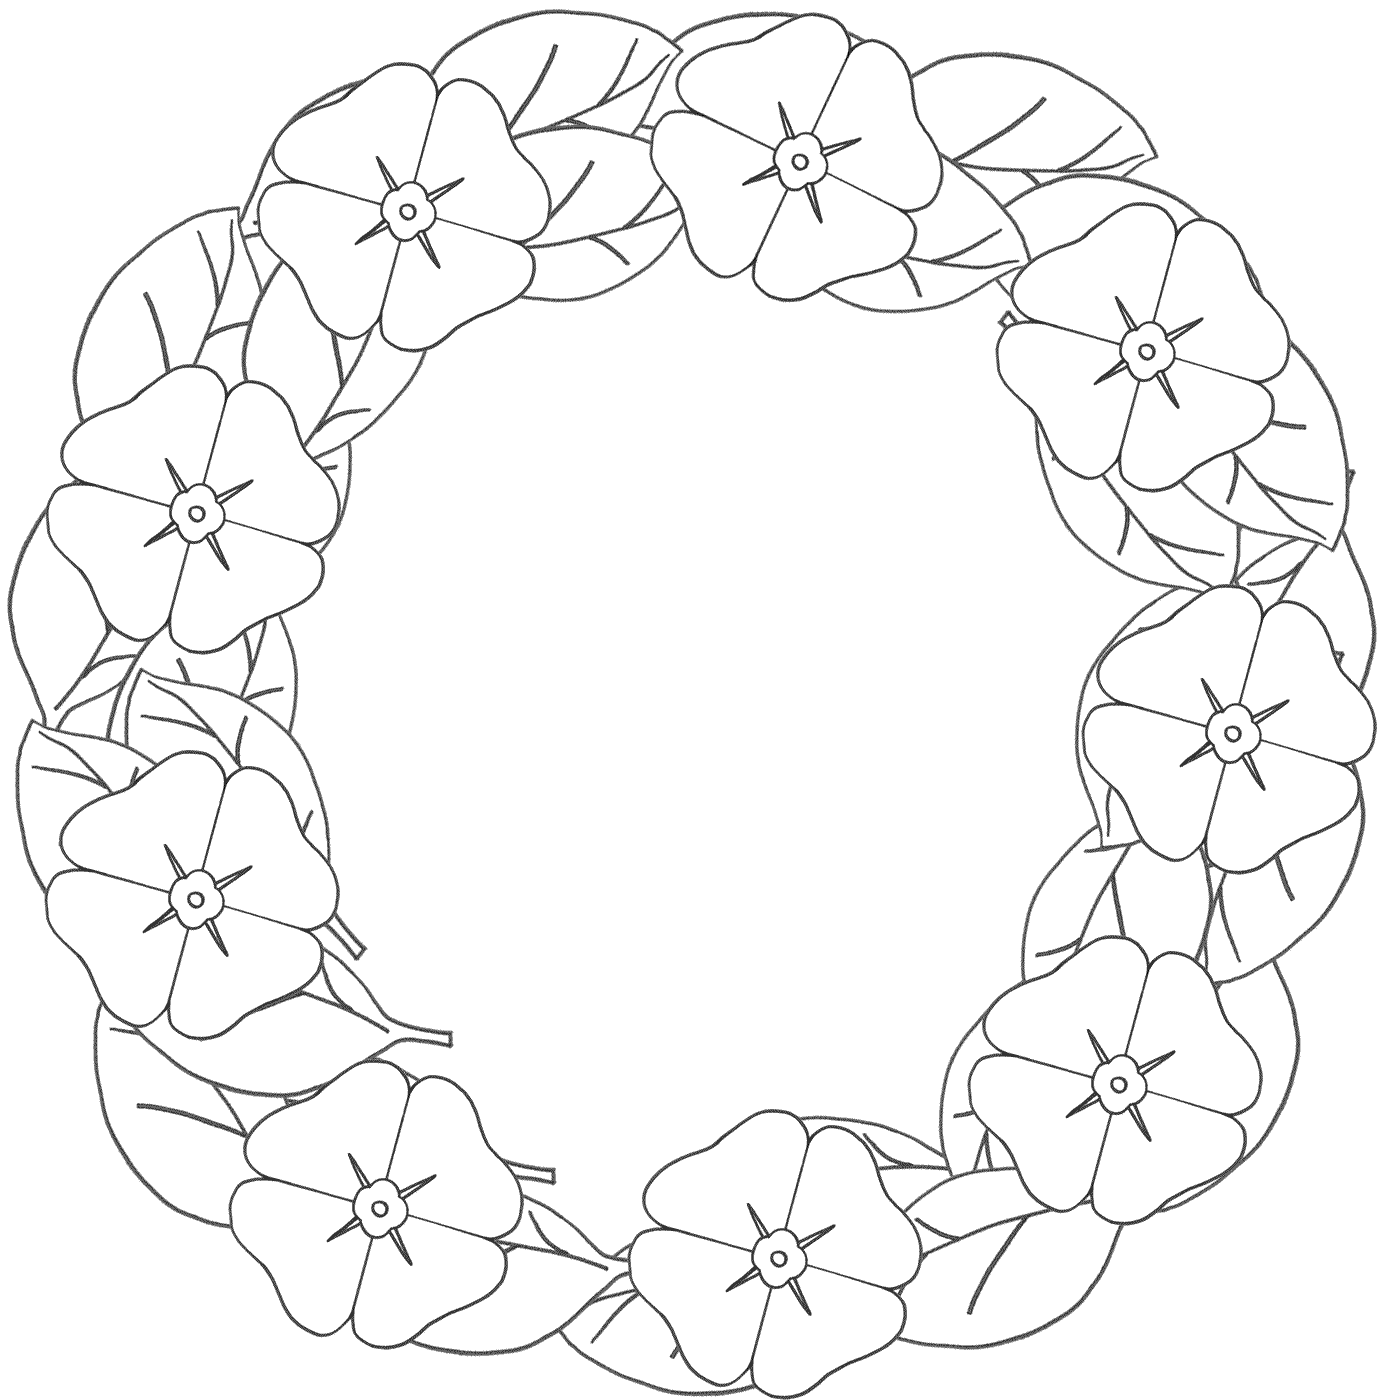 Poppy wreath - Coloring Page (Remembrance Day) | Remembrance day art, Poppy coloring  page, Poppy wreath